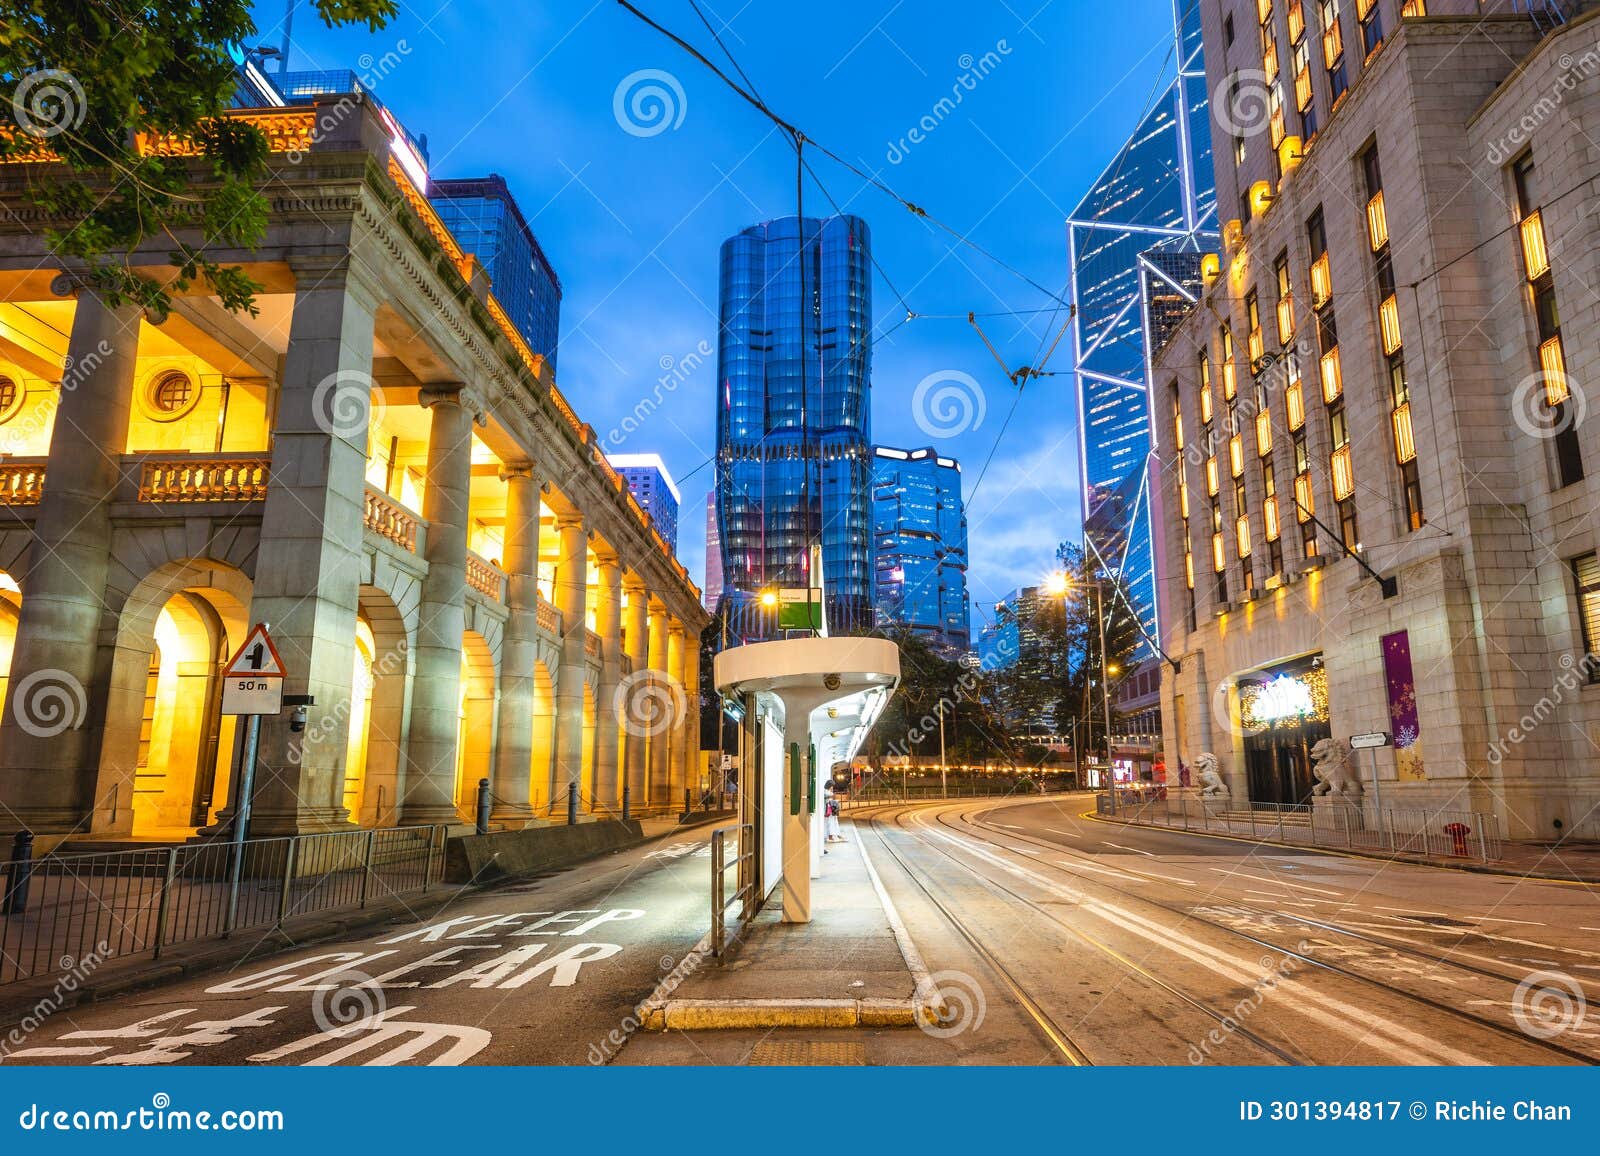 scenery of the statue square in central, hong kong, china